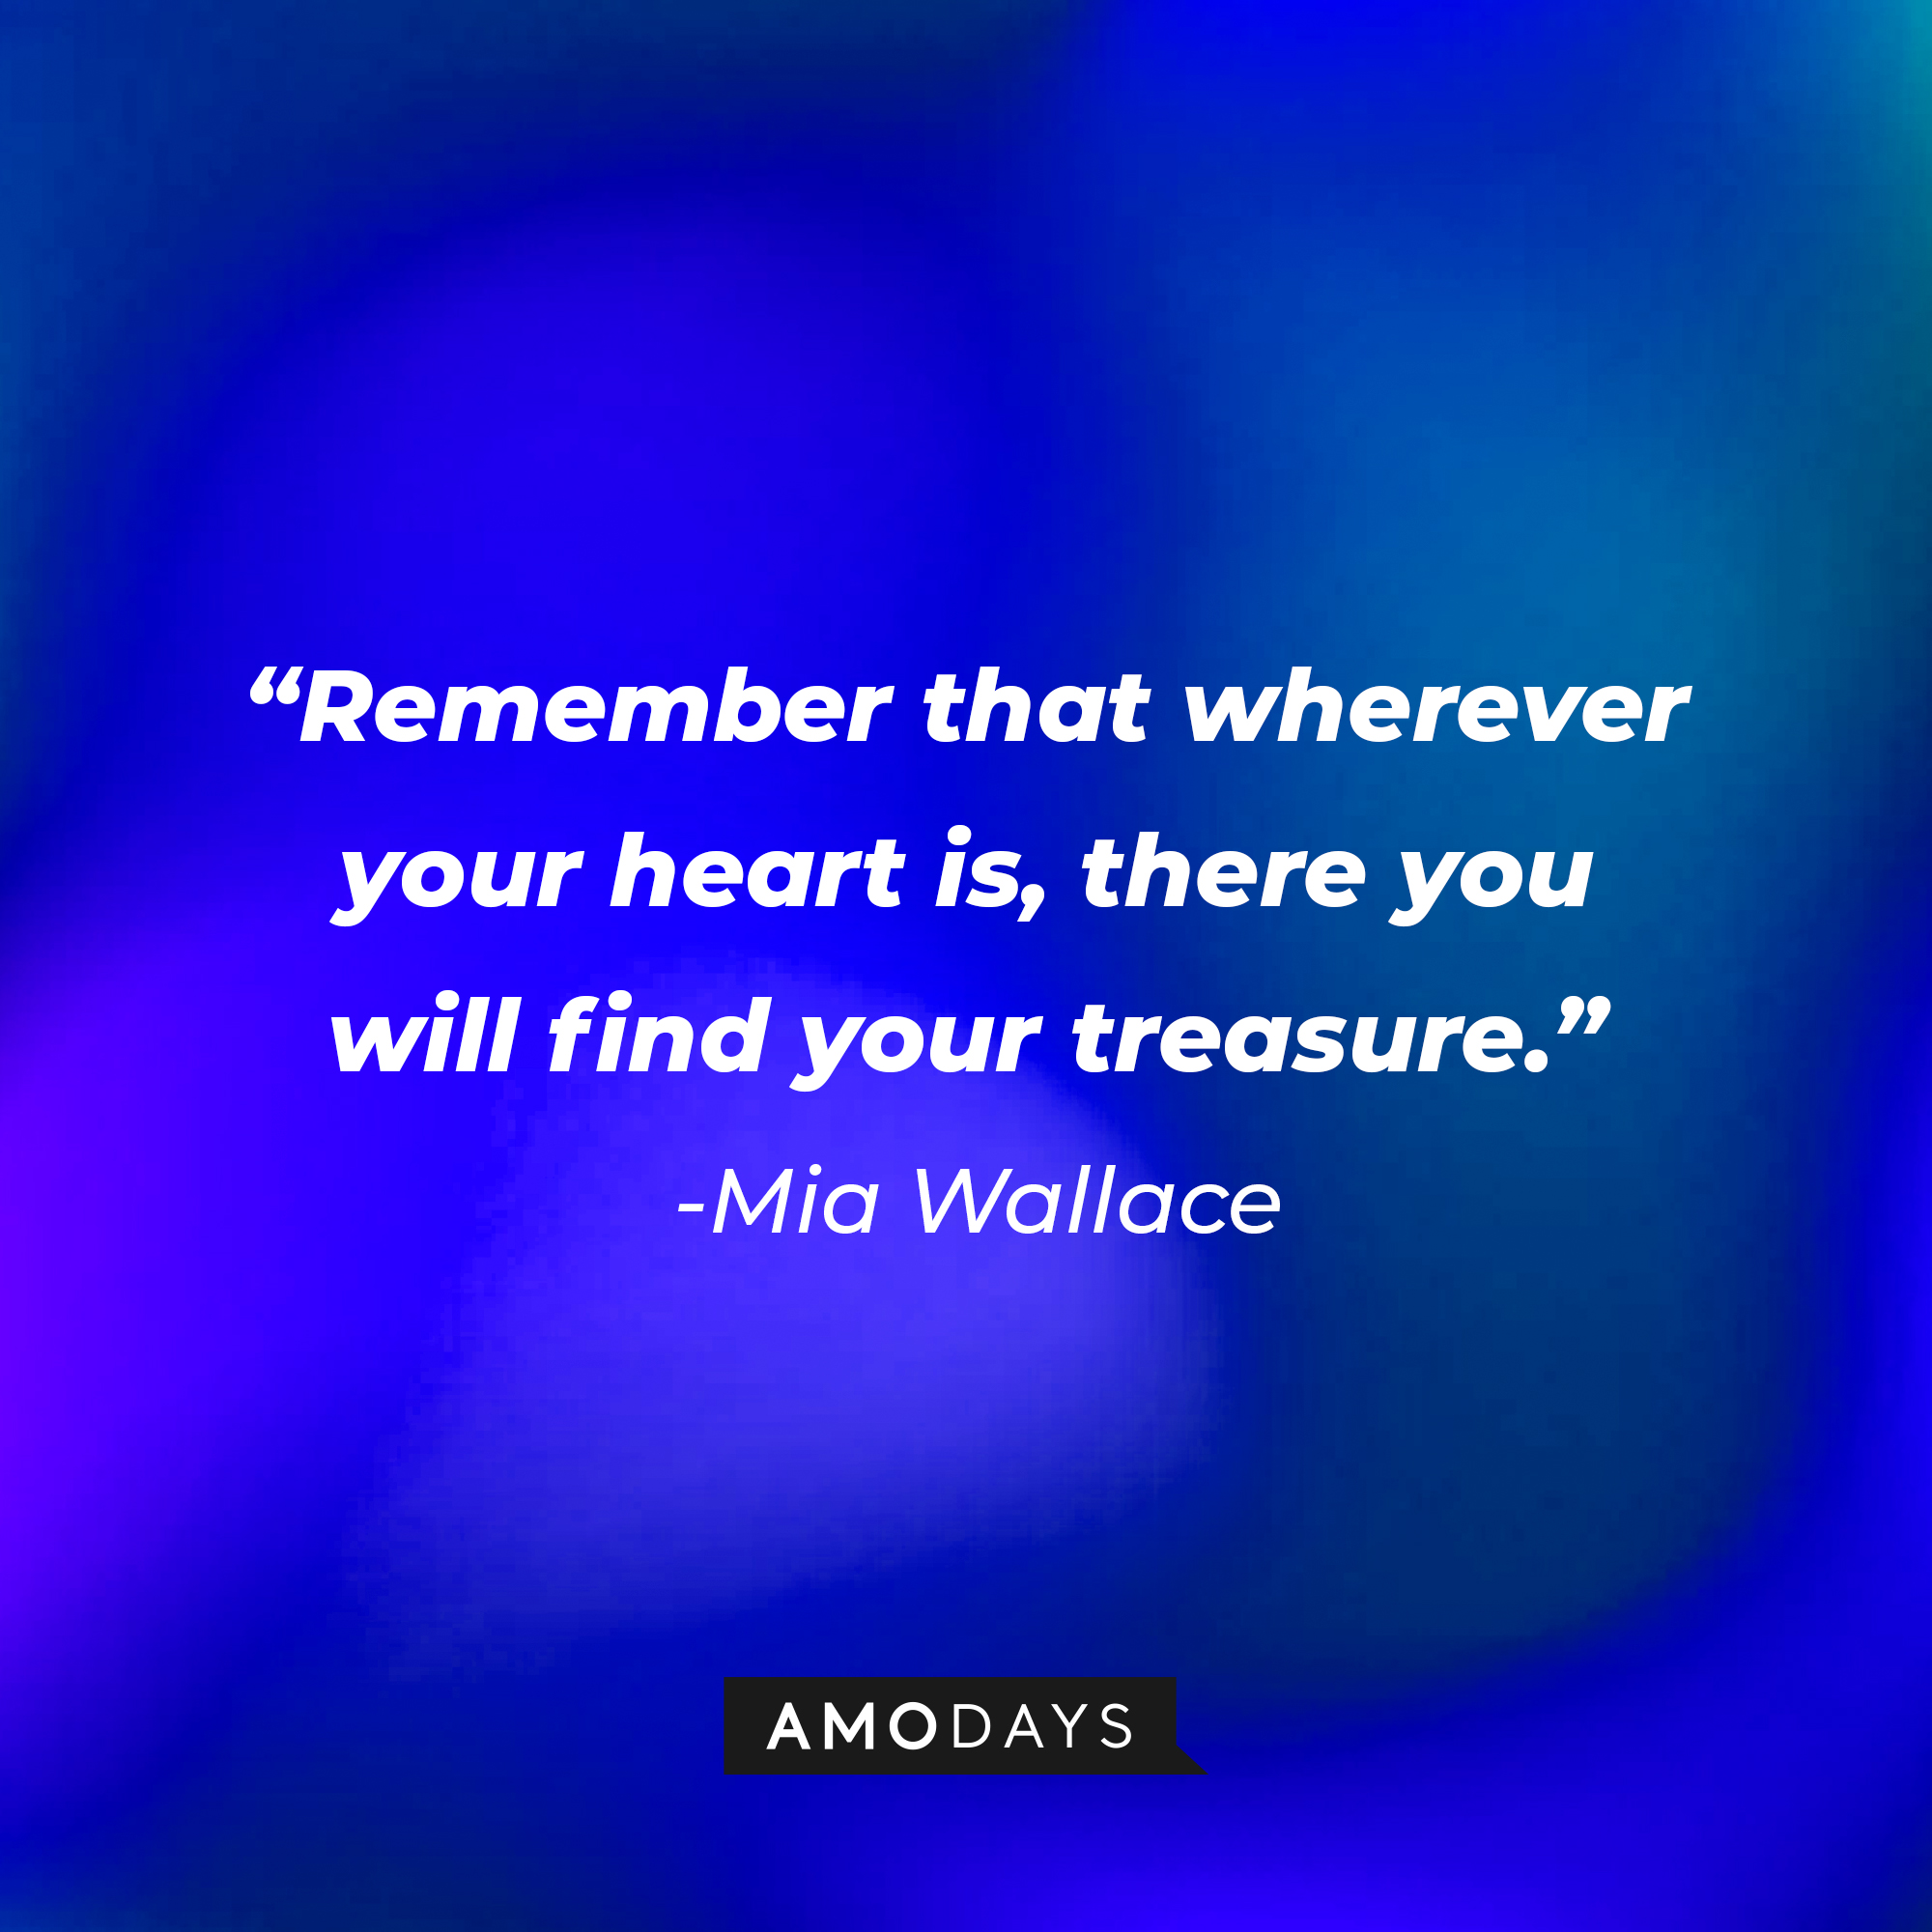 Mia Wallace’s quote: “Remember that wherever your heart is, there you will find your treasure.” | Source: AmoDays